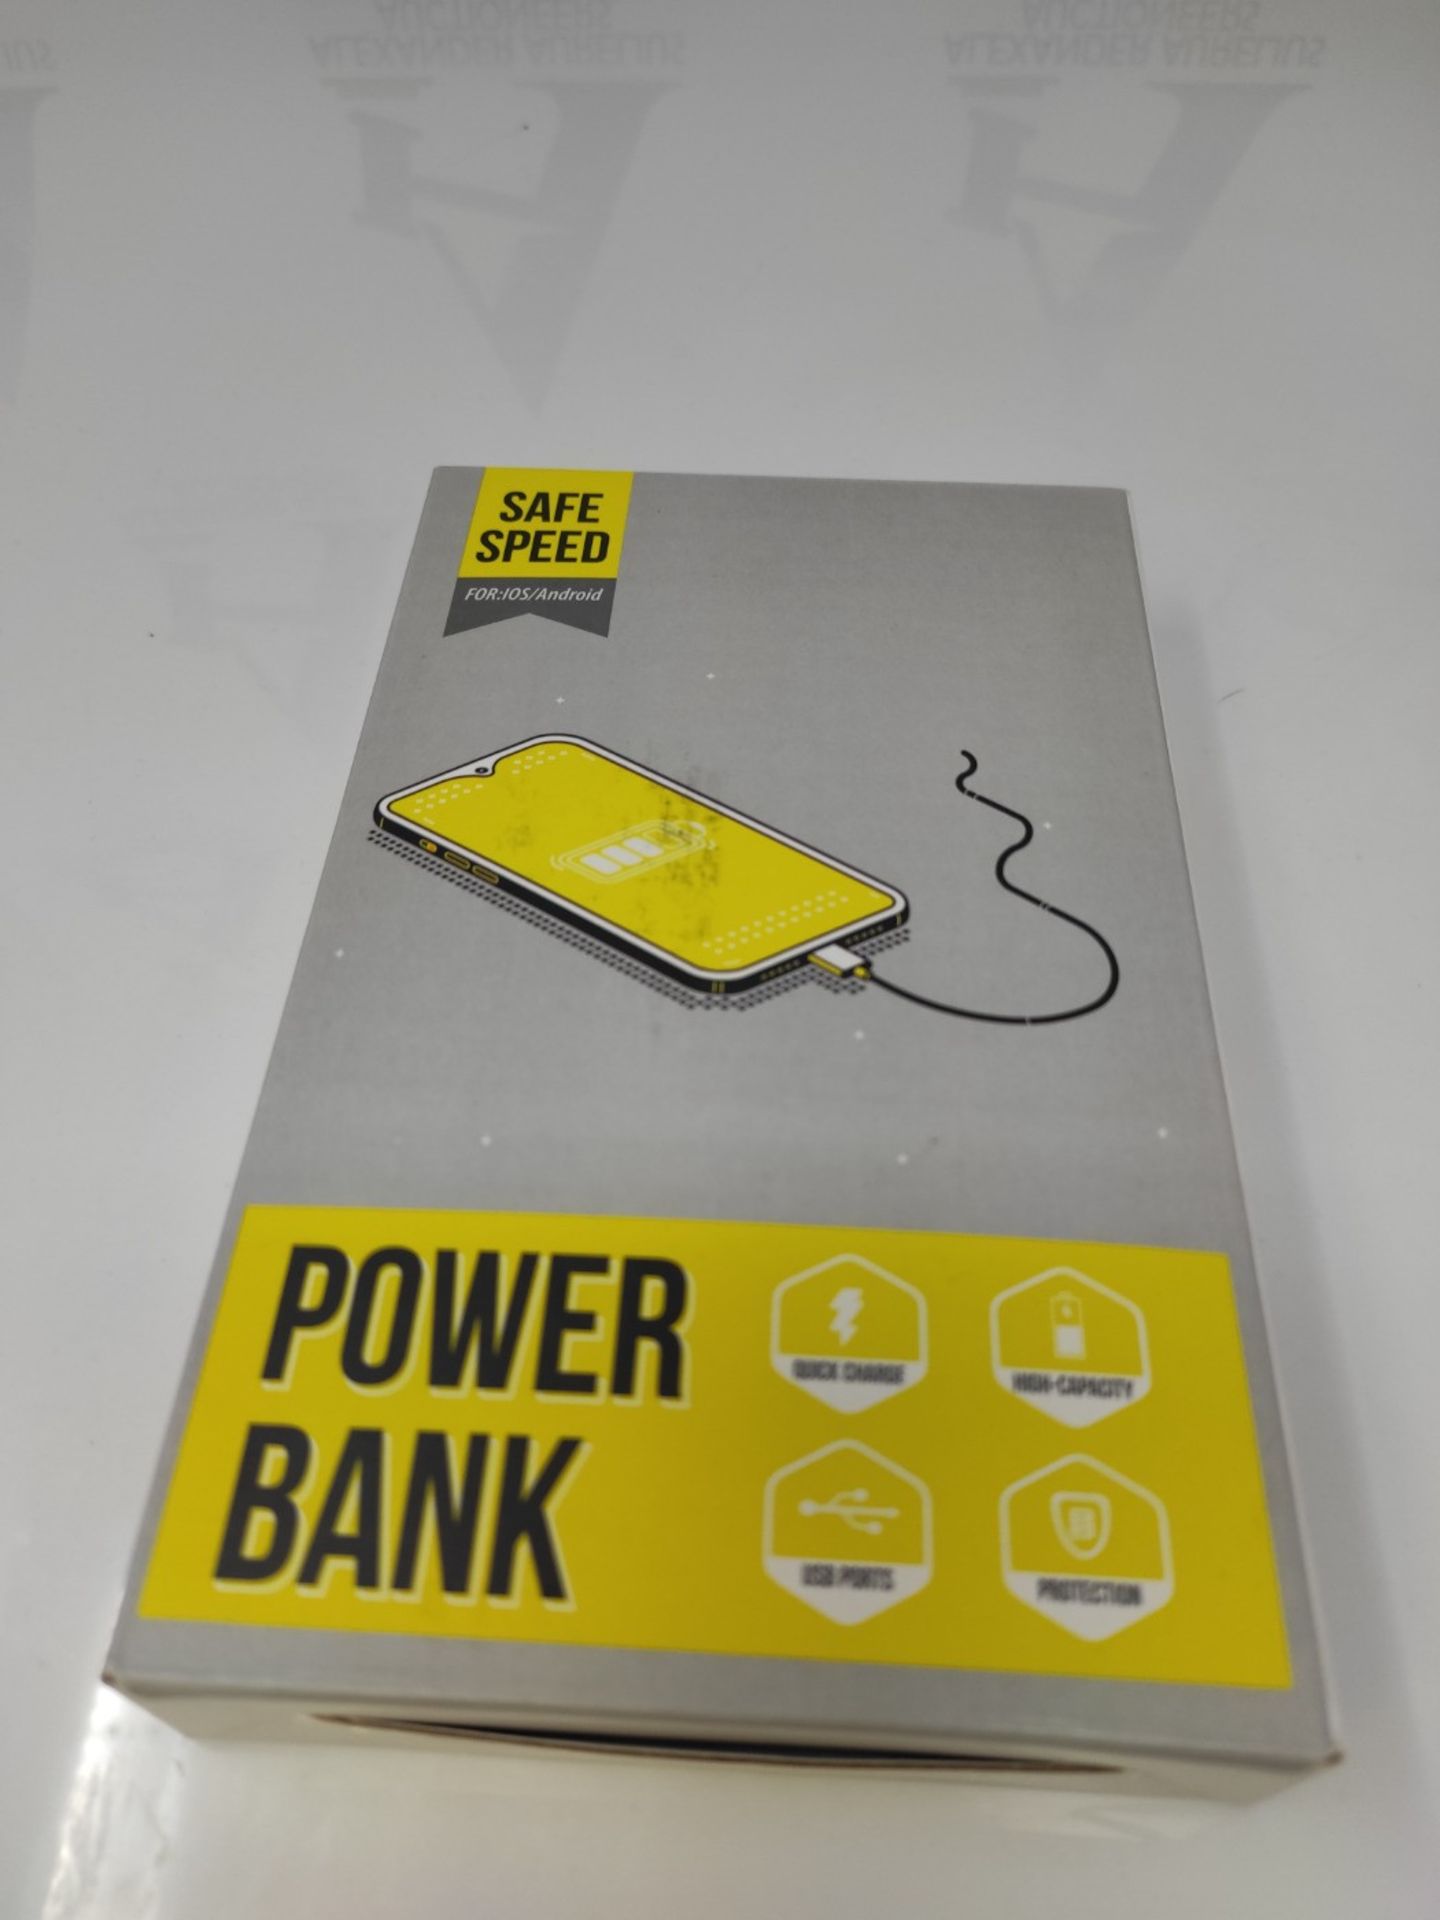 Solar Powerbank 30000mAh External Battery: Power Bank Mobile Outdoor Portable Charger - Image 2 of 6